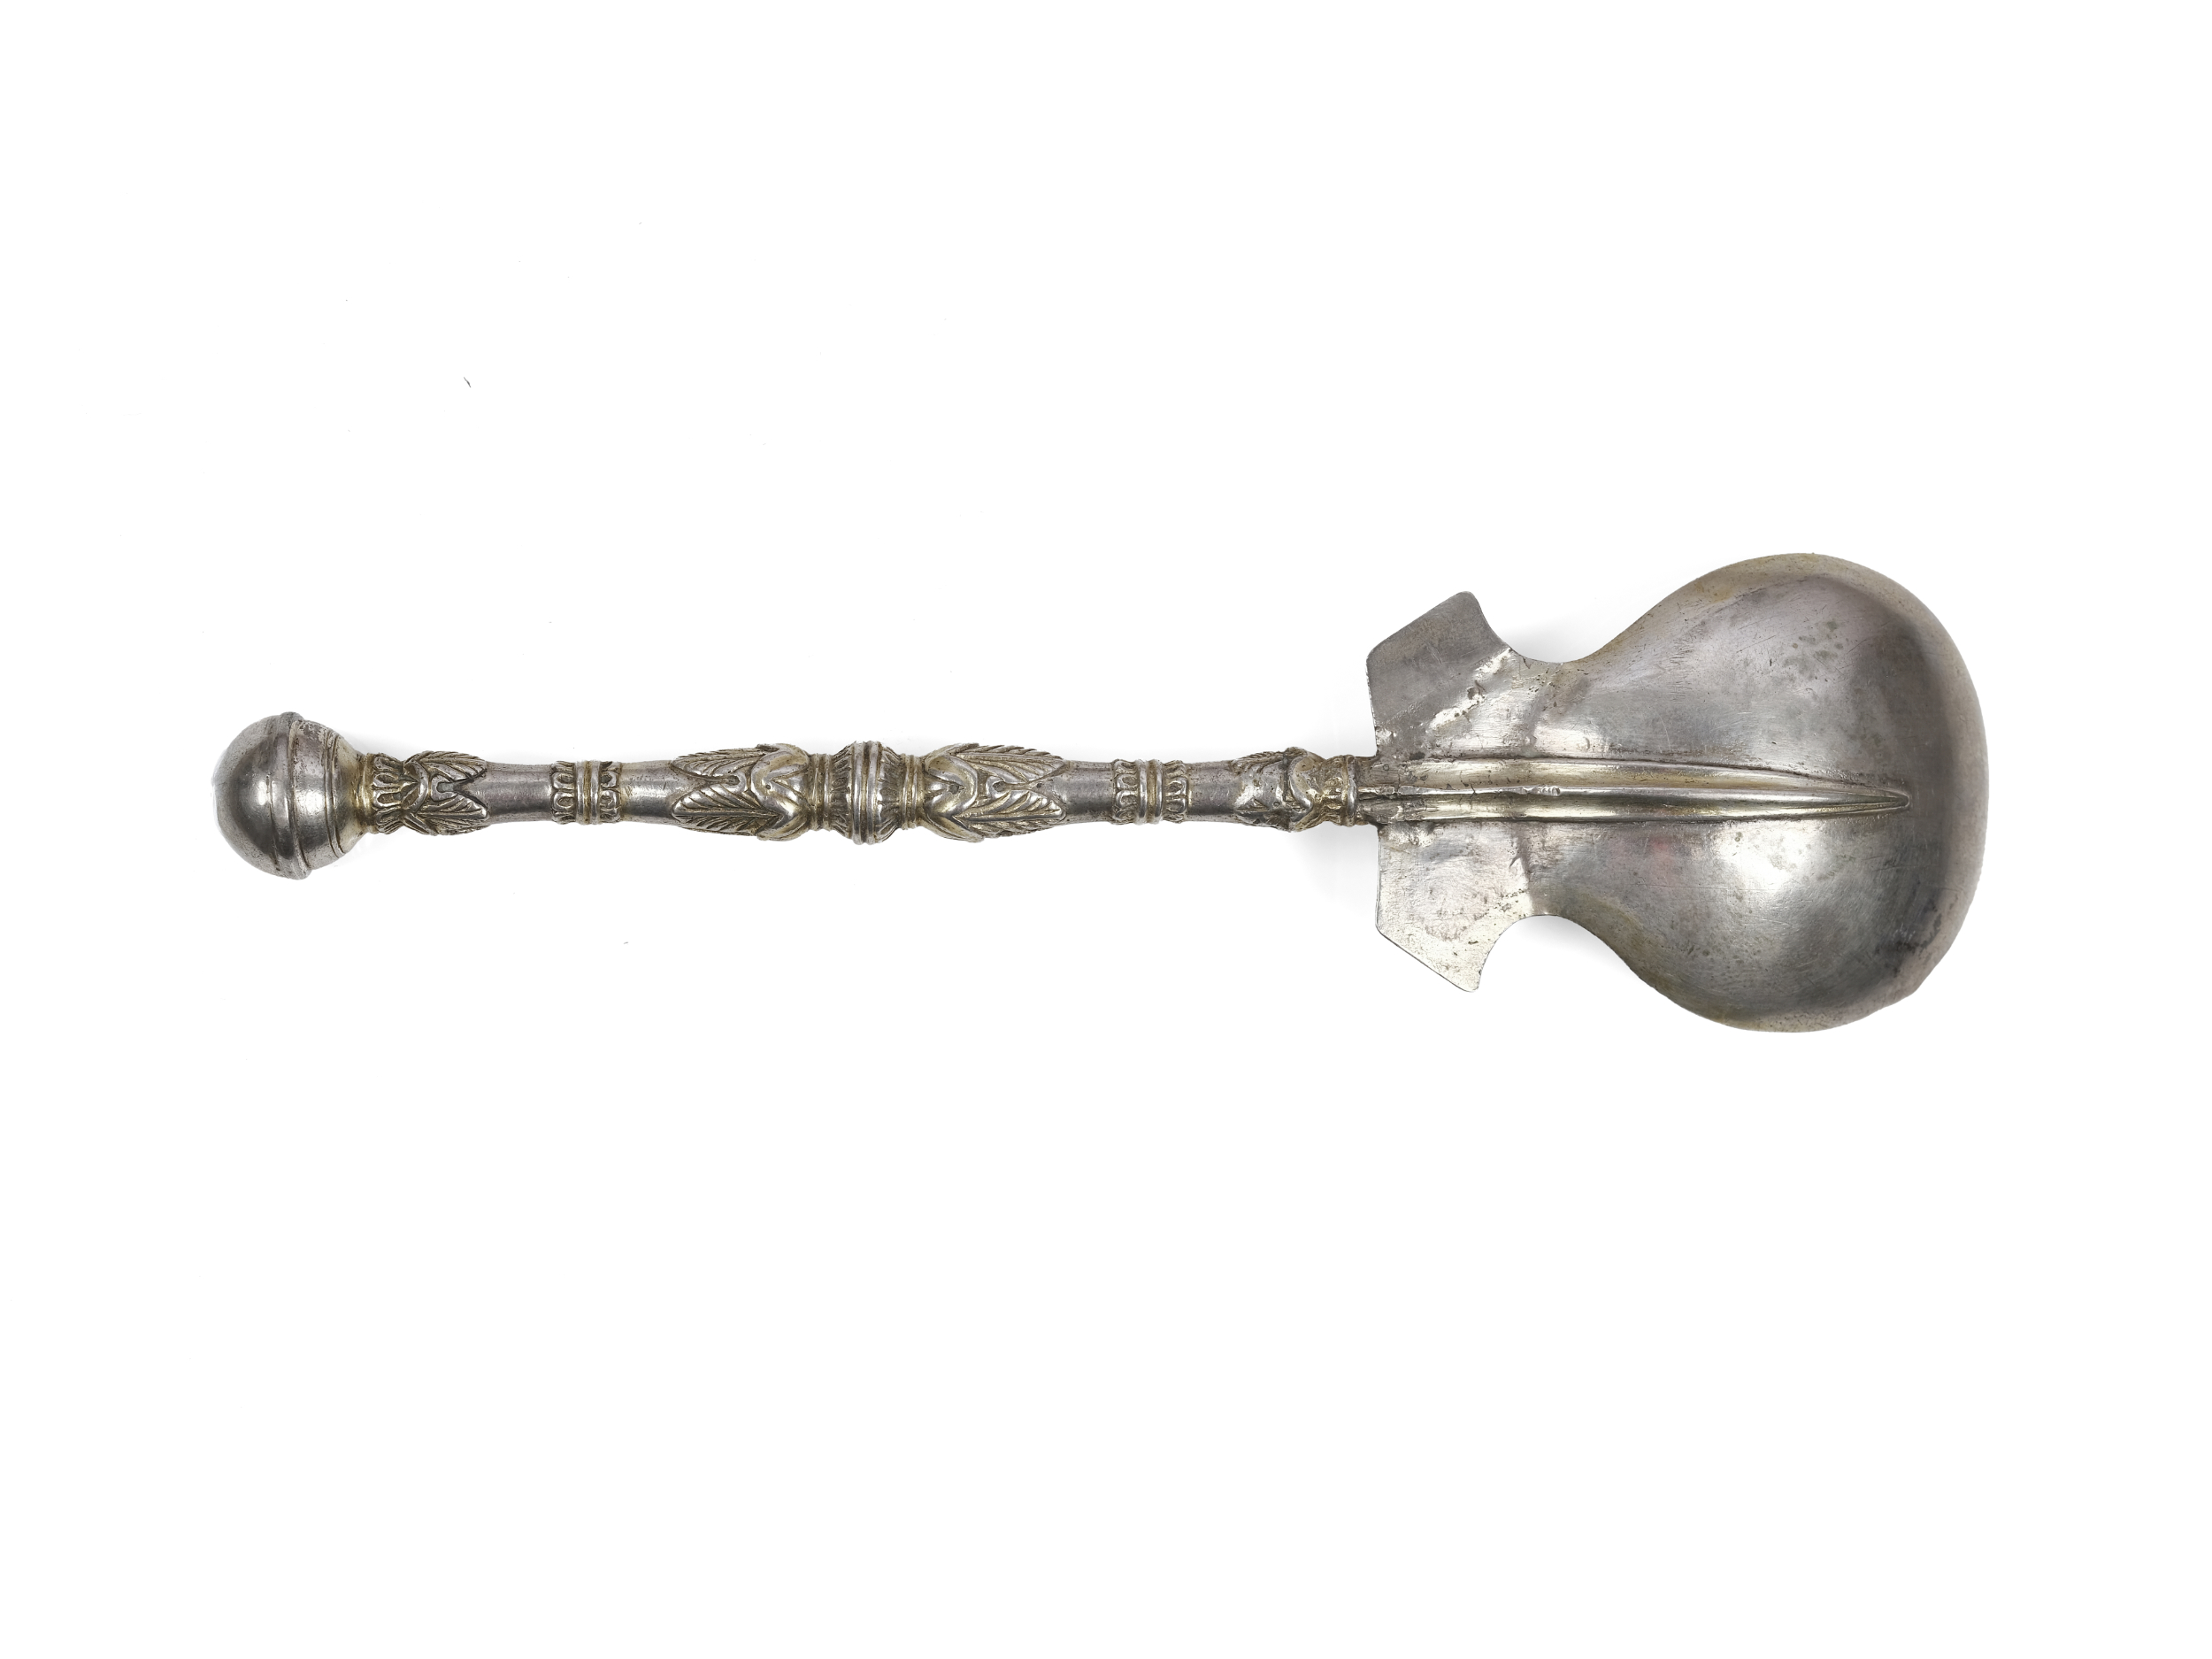 Spoon, 16th/17th century - Image 2 of 2